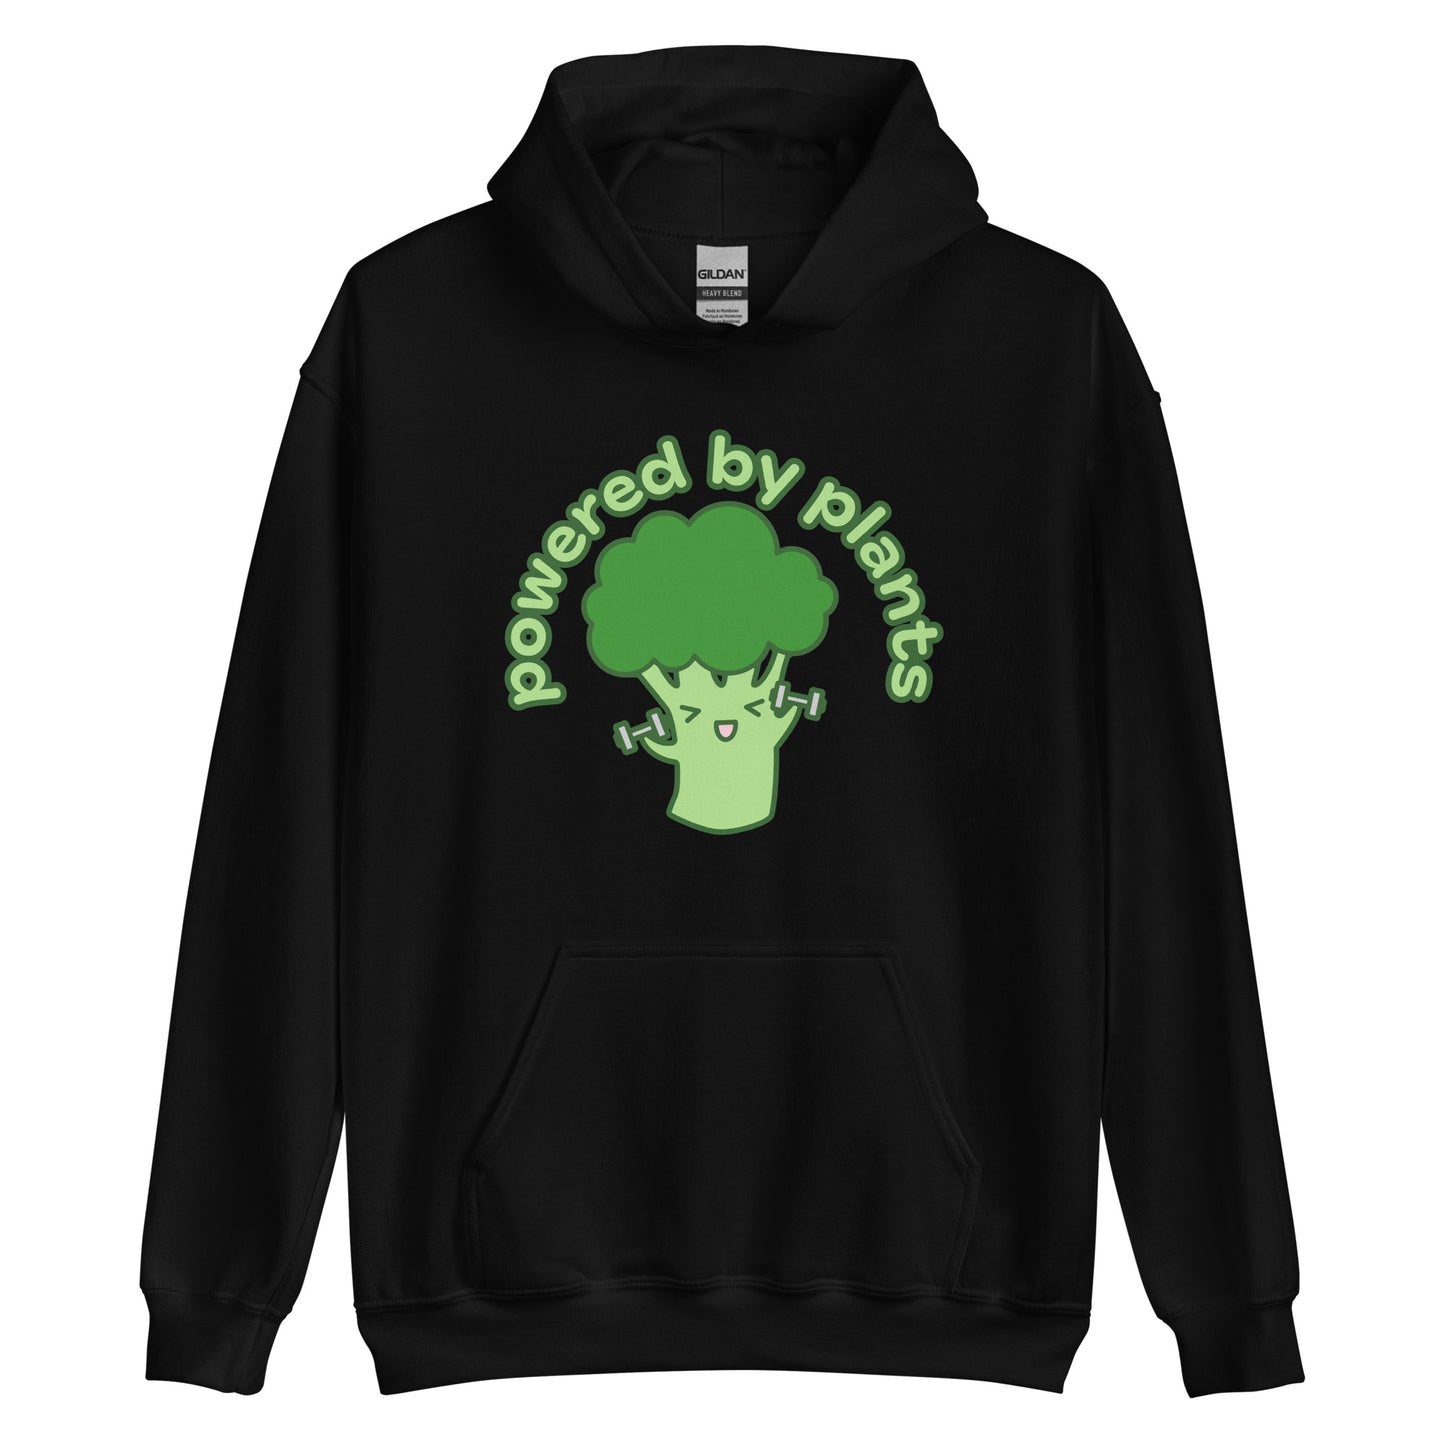 A black hooded sweatshirt featuring an illustration of a cartoon broccoli character. The broccoli is excitedly lifting weights, and text in an arc above the broccoli reads "powered by plants".